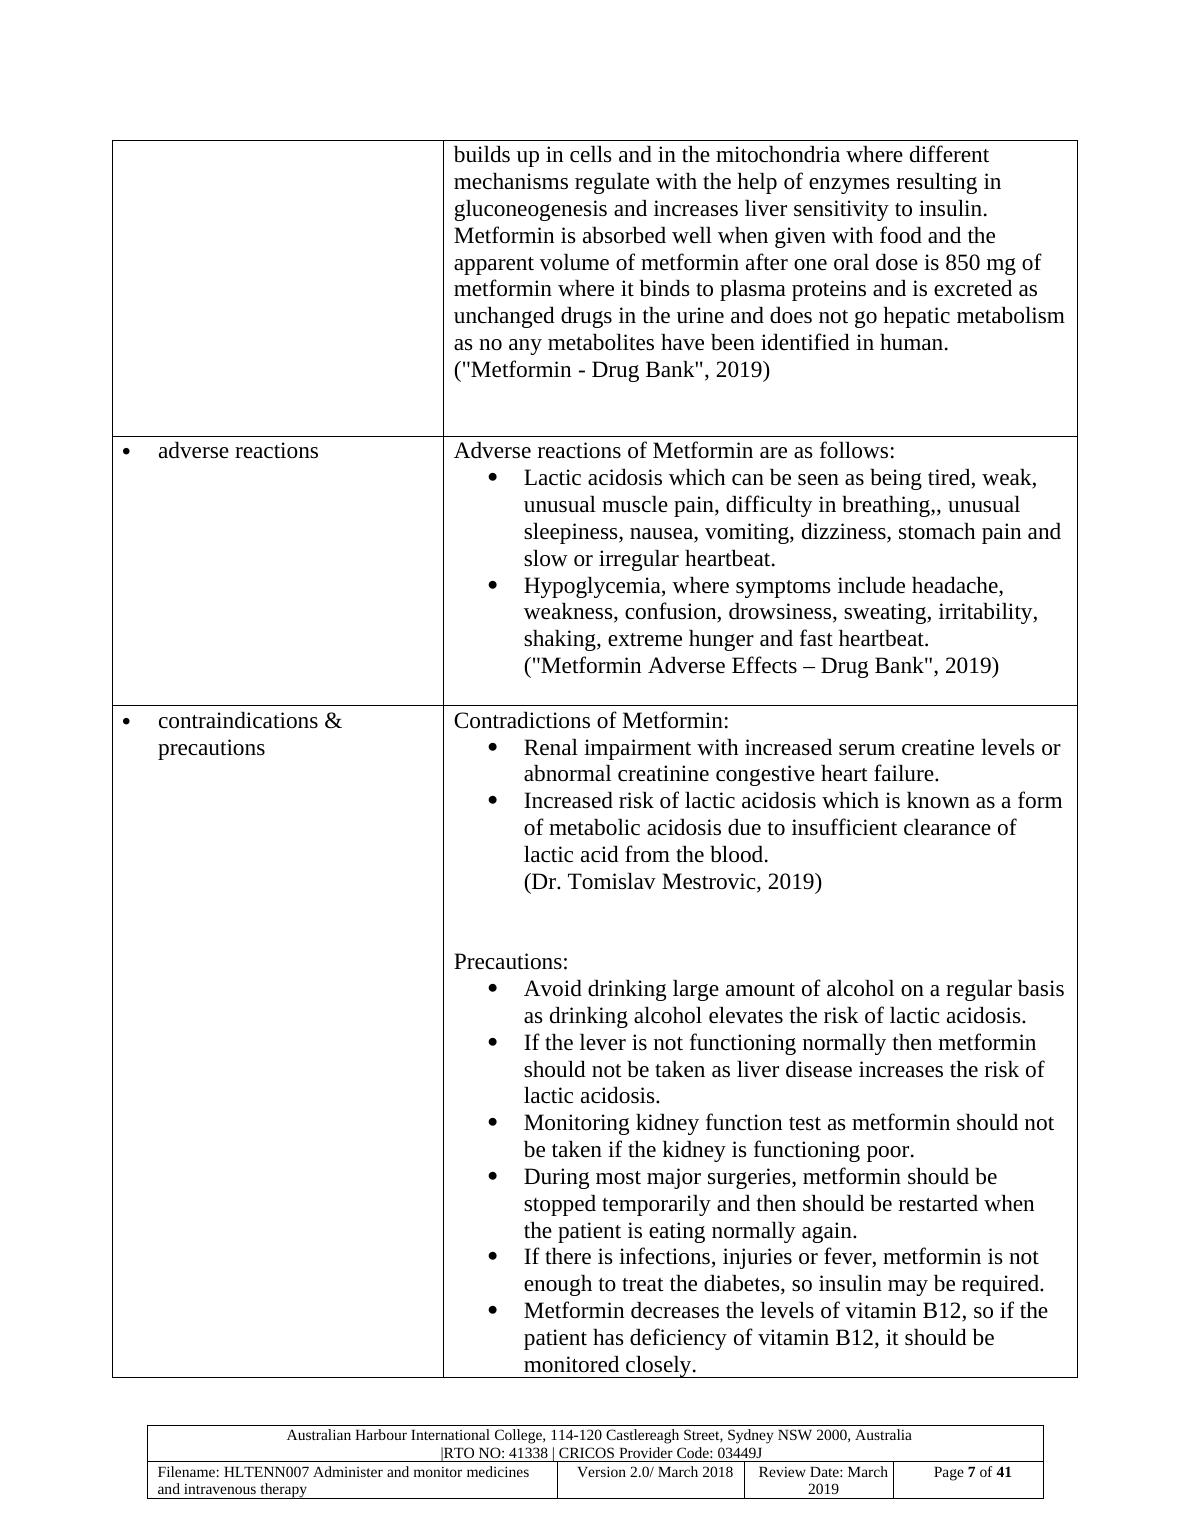 Research Work/Project Work - Medication Summary_7